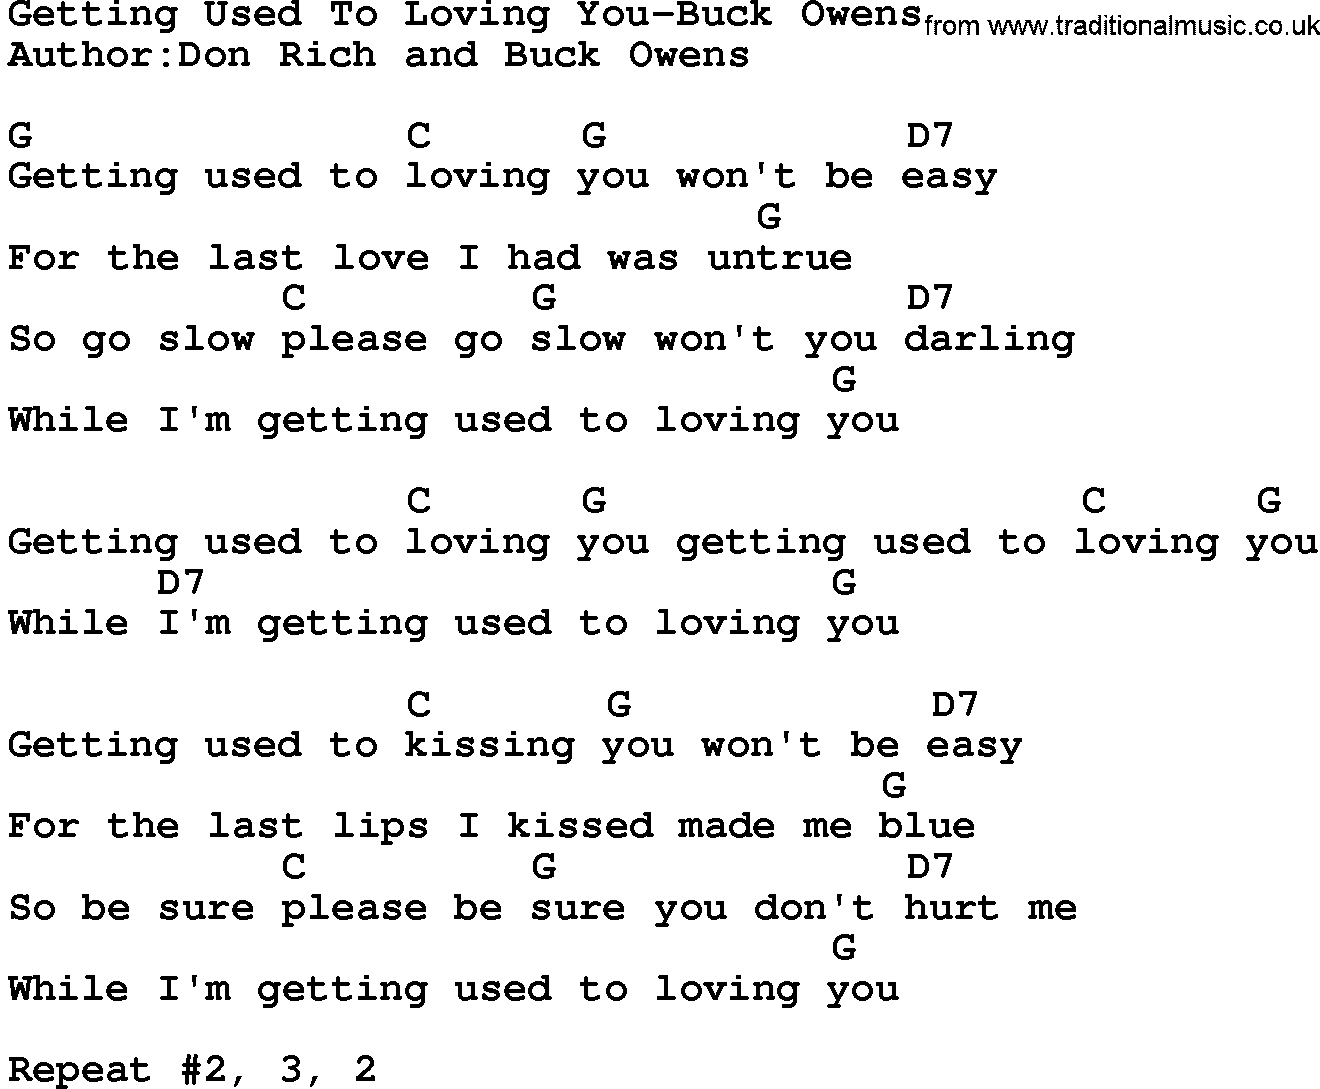 Country music song: Getting Used To Loving You-Buck Owens lyrics and chords